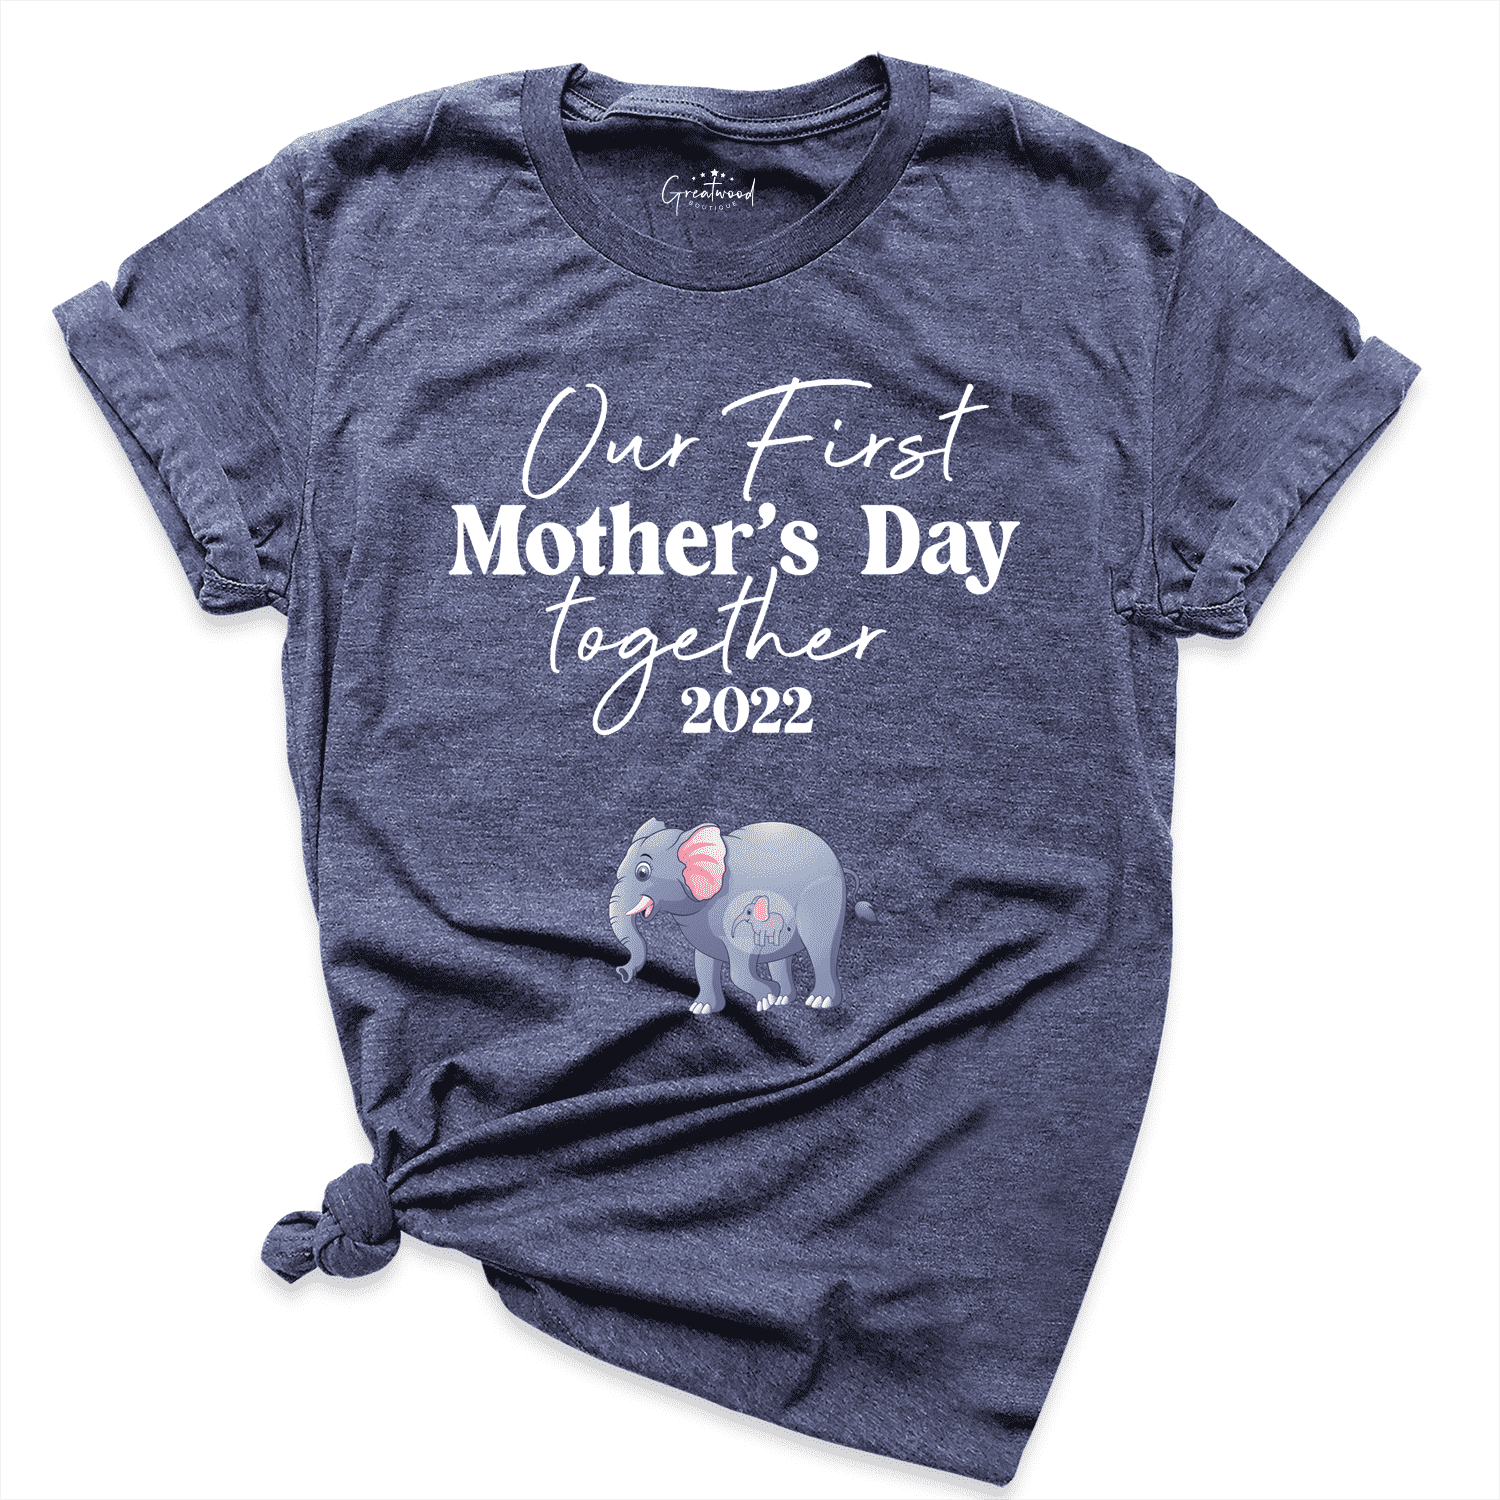 Our First Mothers Day Together Shirt Navy - Greatwood Boutique